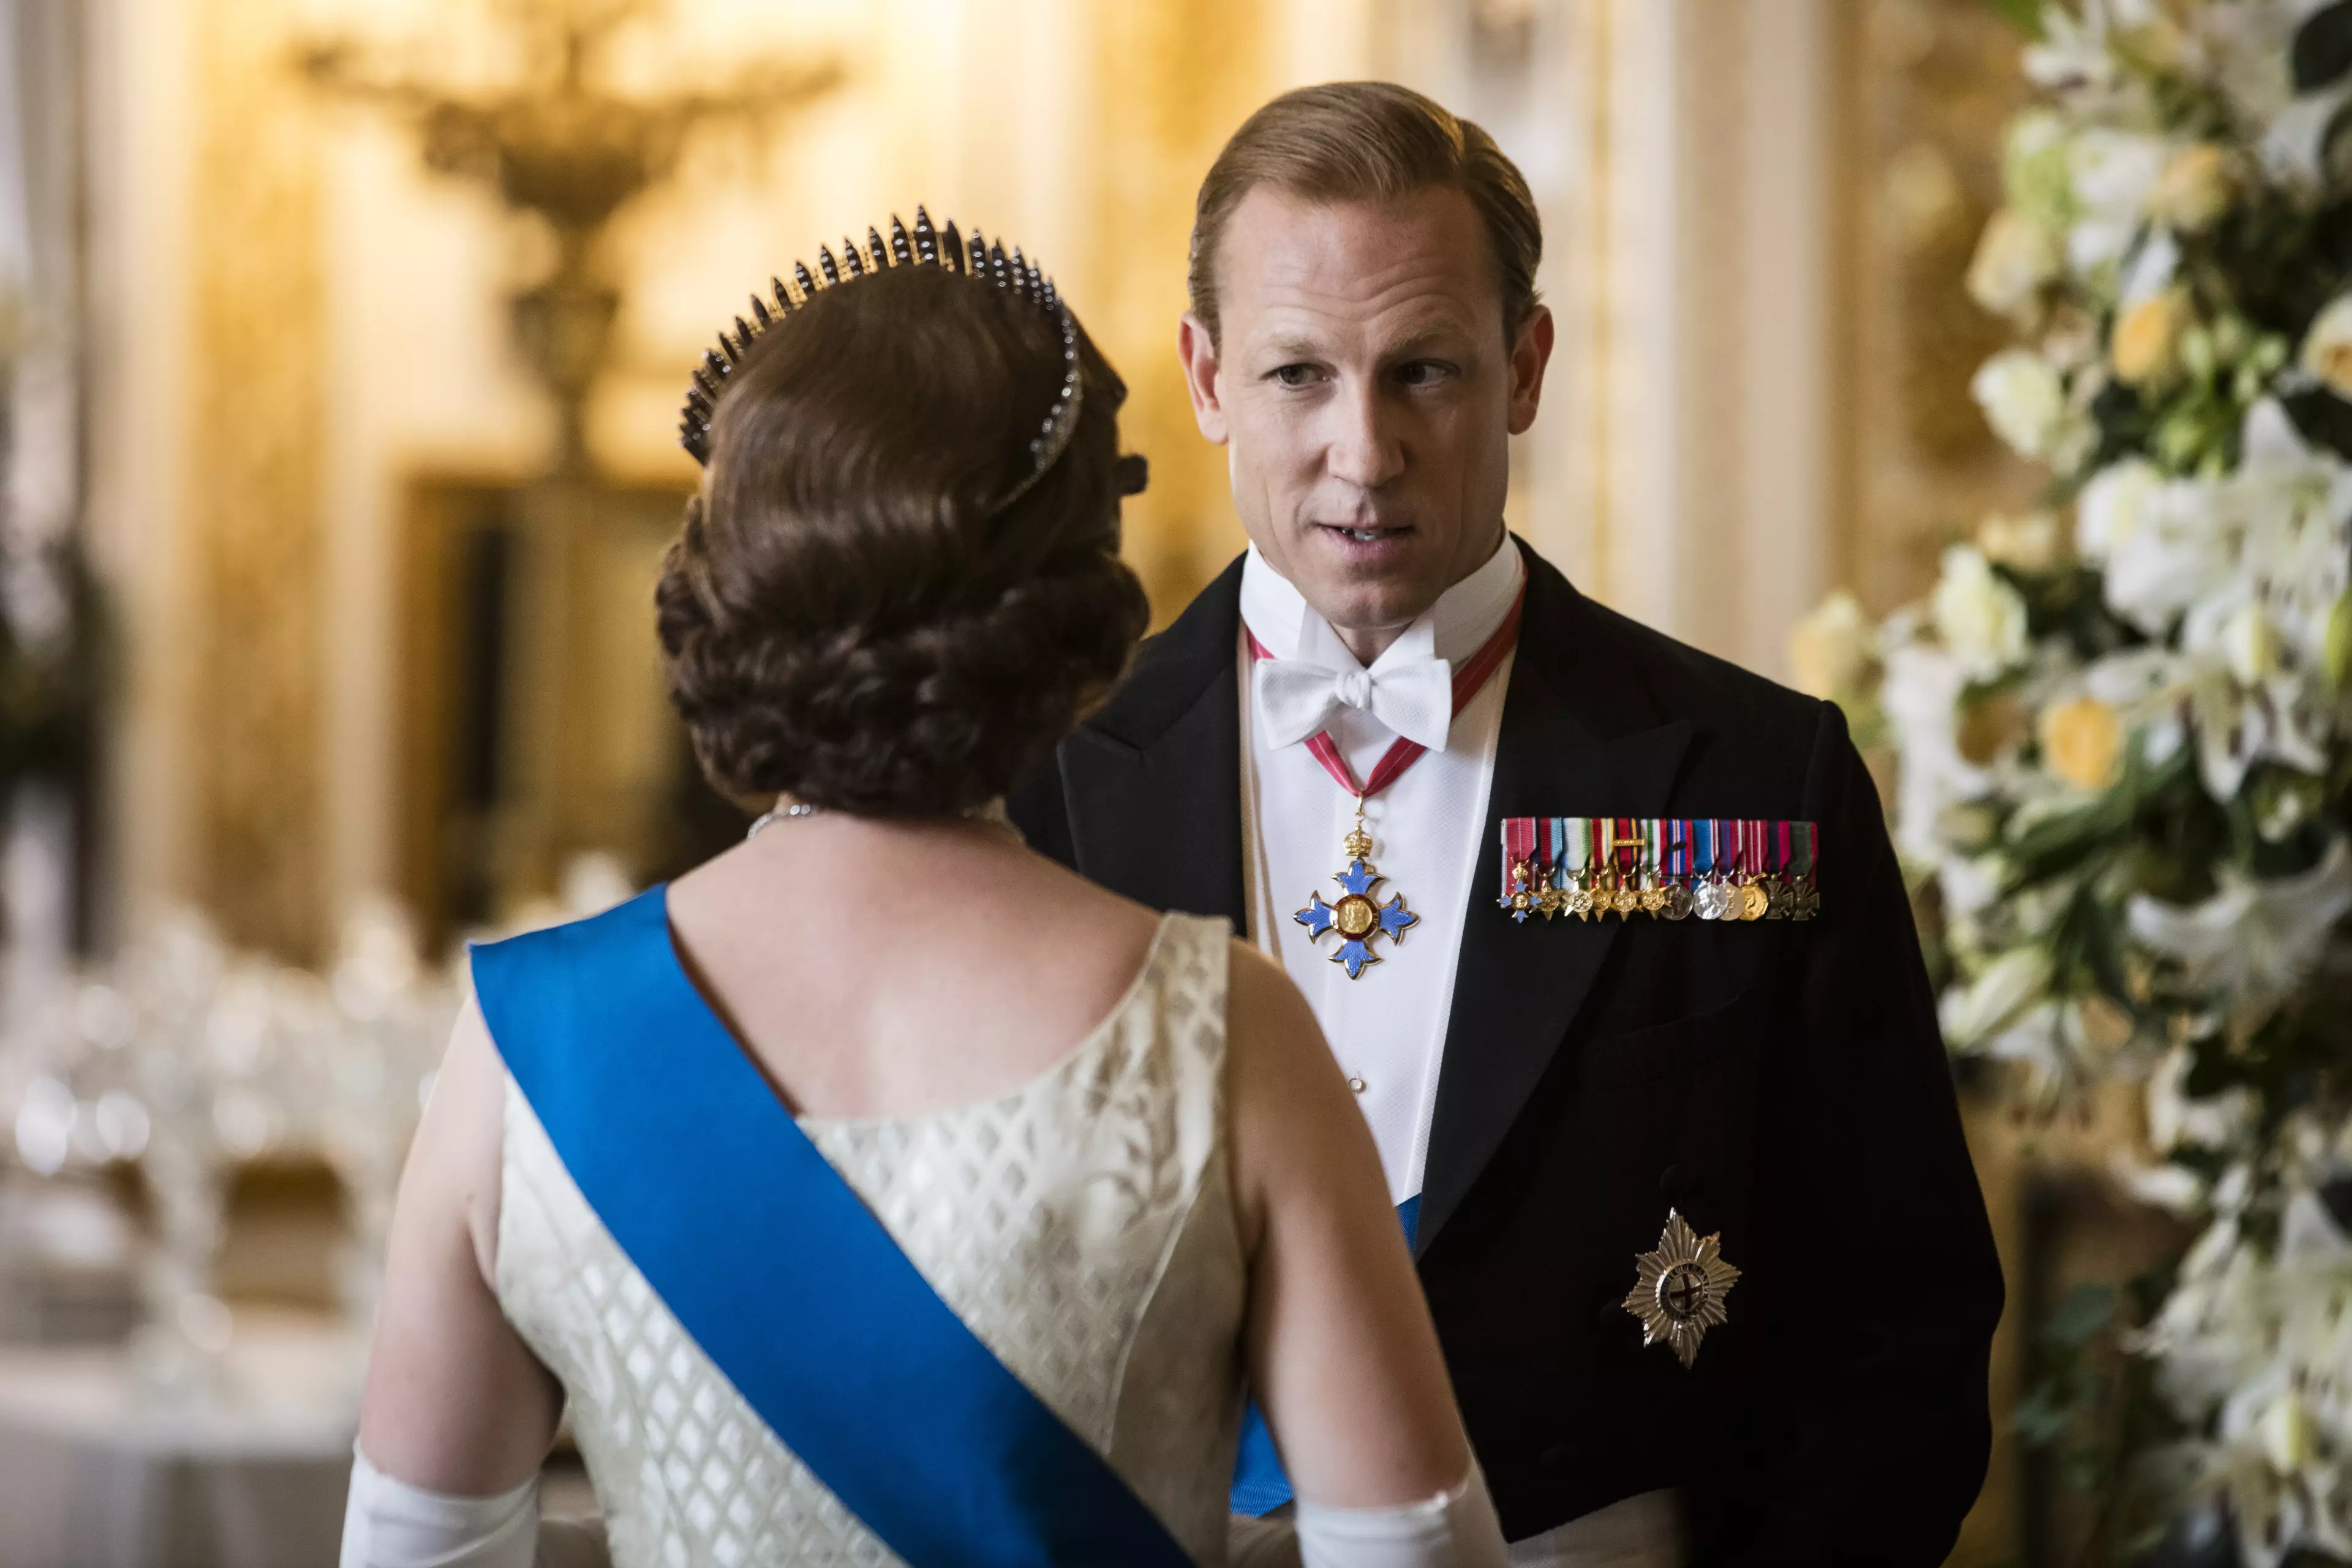 Tobias Menzies played Prince Philip in The Crown (